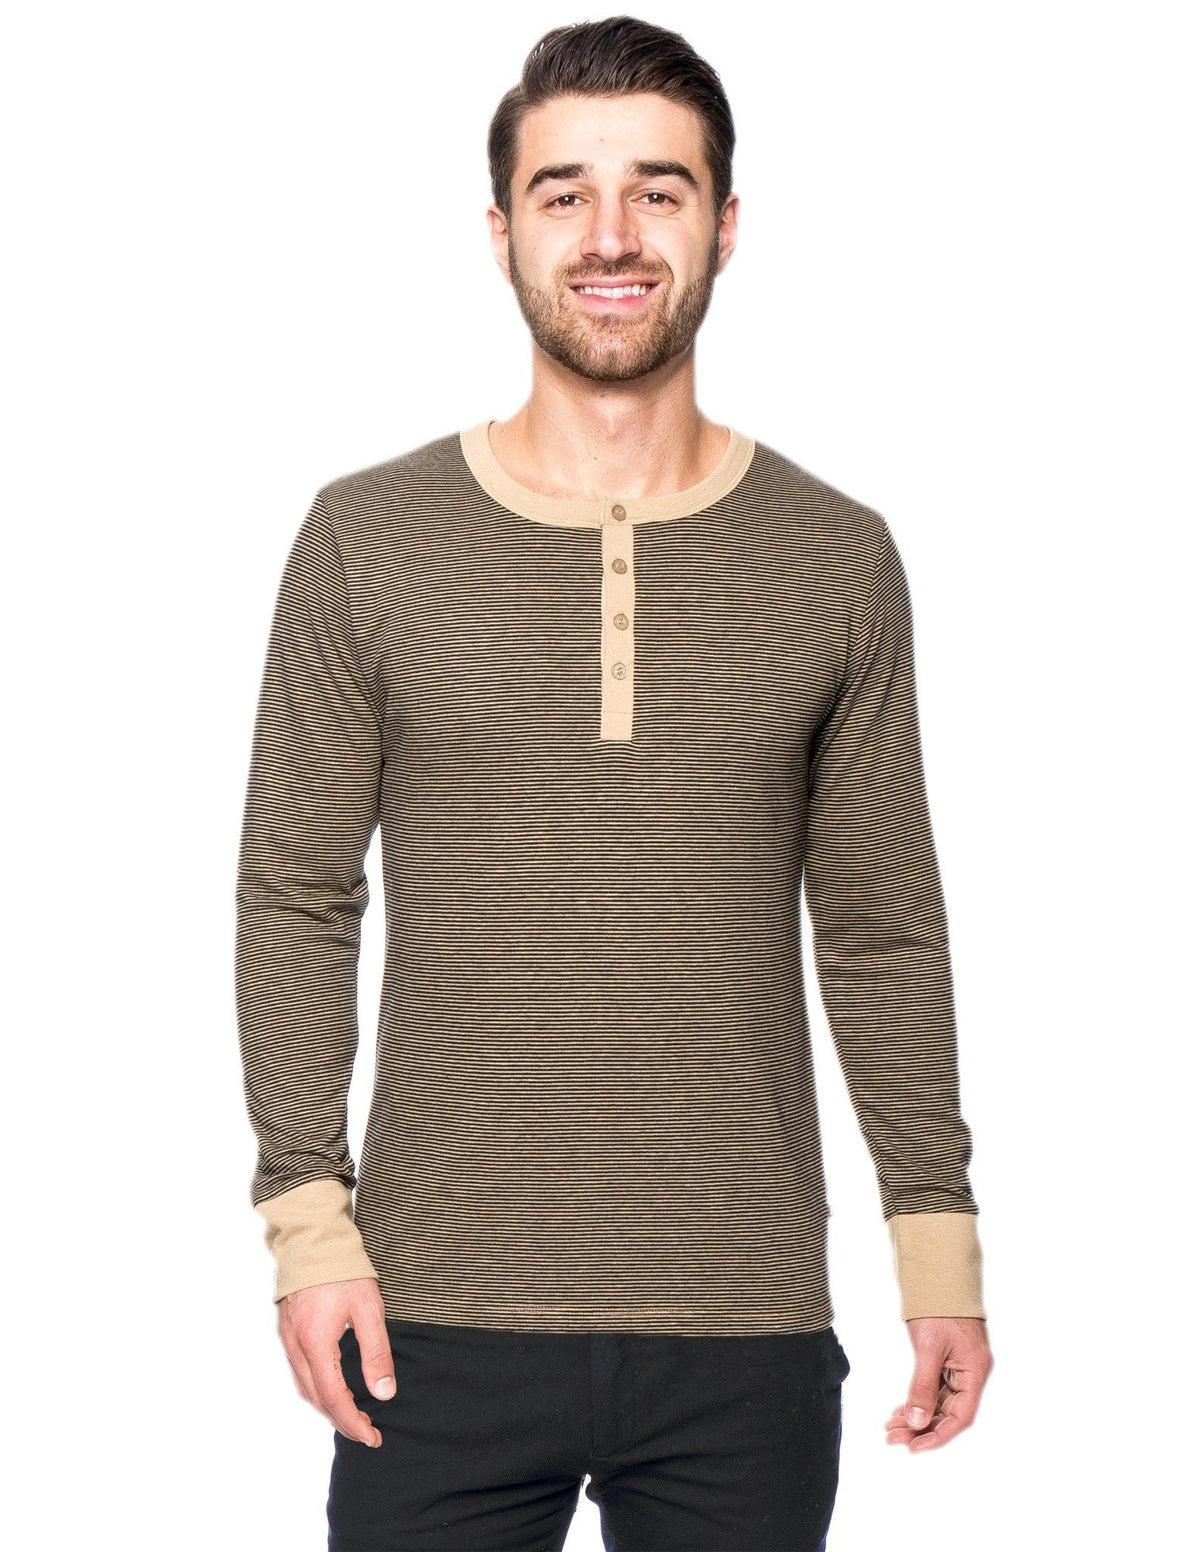 Men's Double Layer Thermal Long Sleeve Henley Top - Stripes Black/Brown